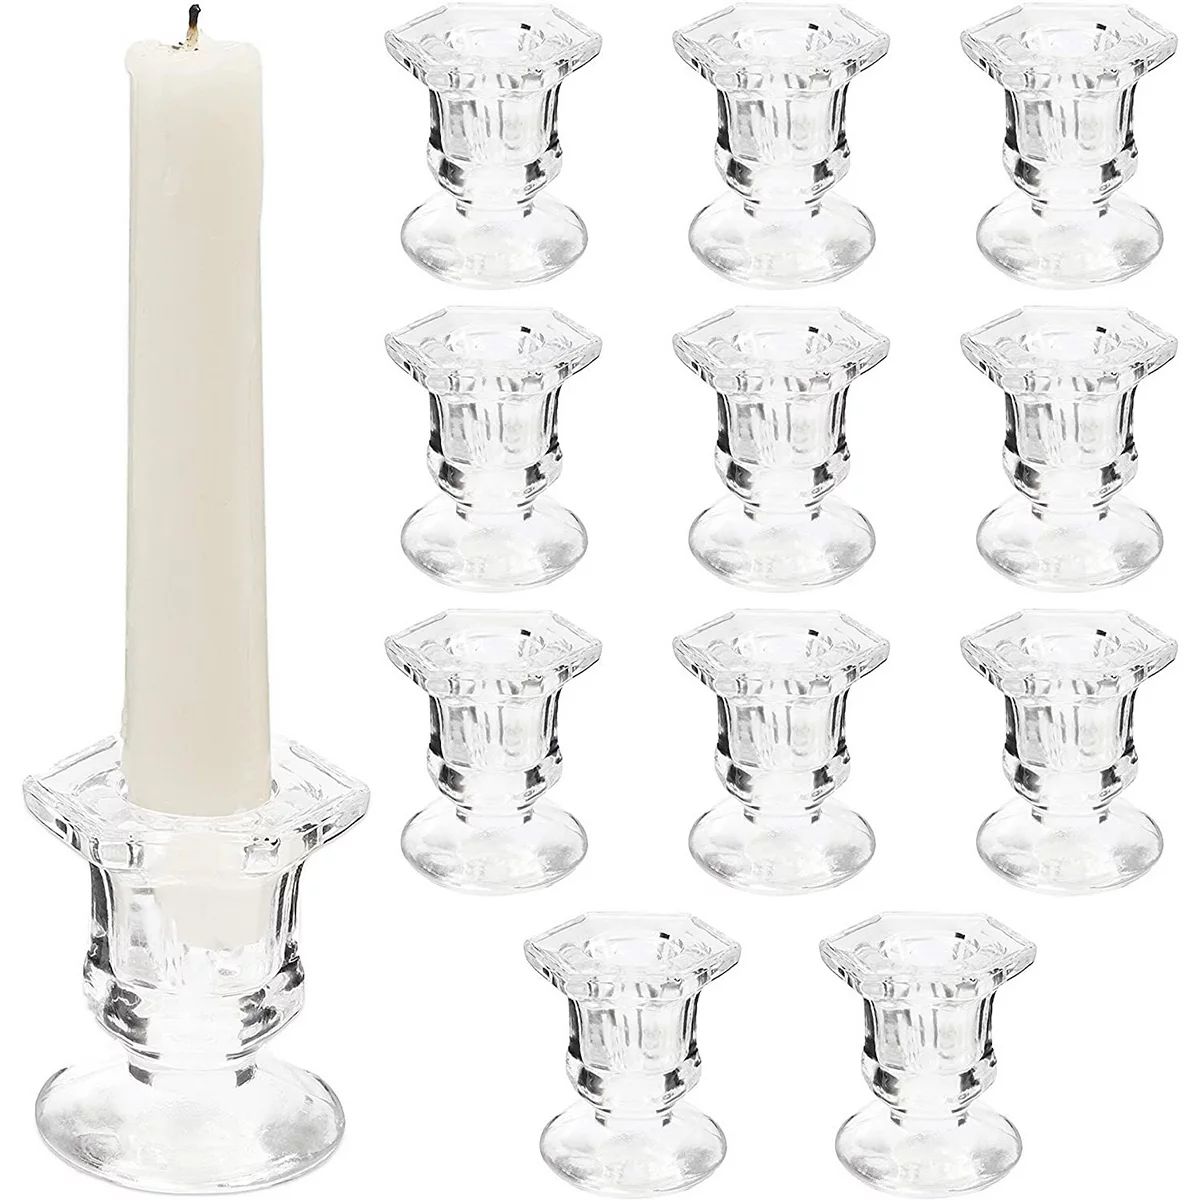 Juvale Glass Candle Holders Set, Clear Taper Candlestick Holder (12 Pack) | Kohl's